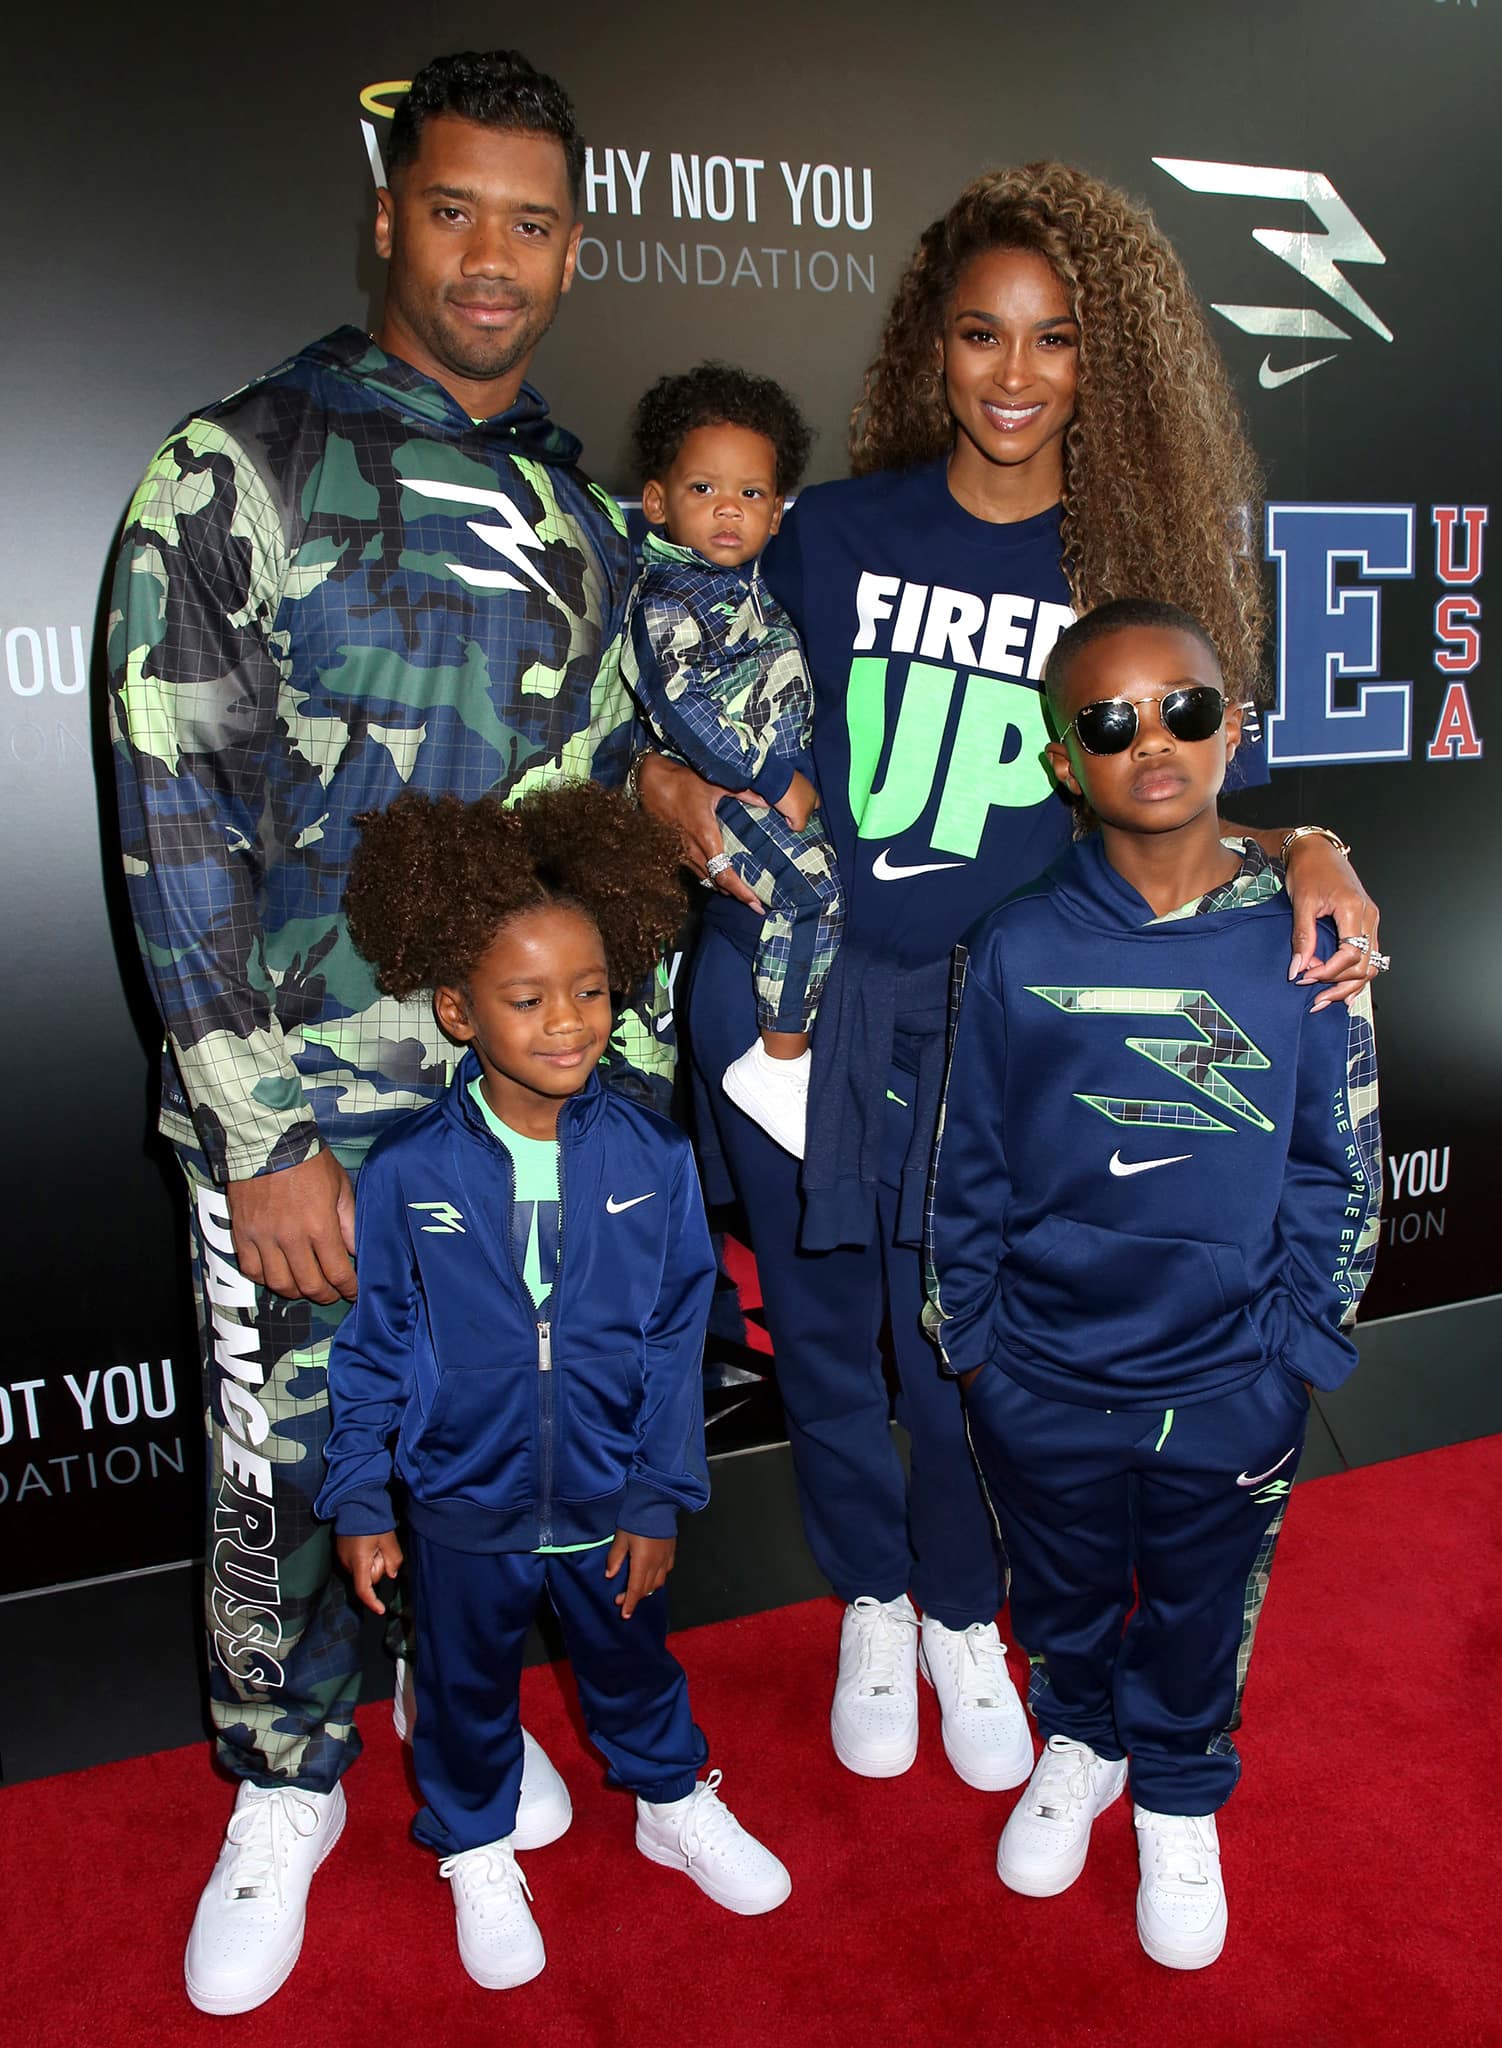 Russell Wilson launches 3BRAND clothing line with Ciara and their three kids, sons Future Jr, 7, and Win, 11 months, and daughter Sienna, 4, at Rookie USA Flagship Store in NYC